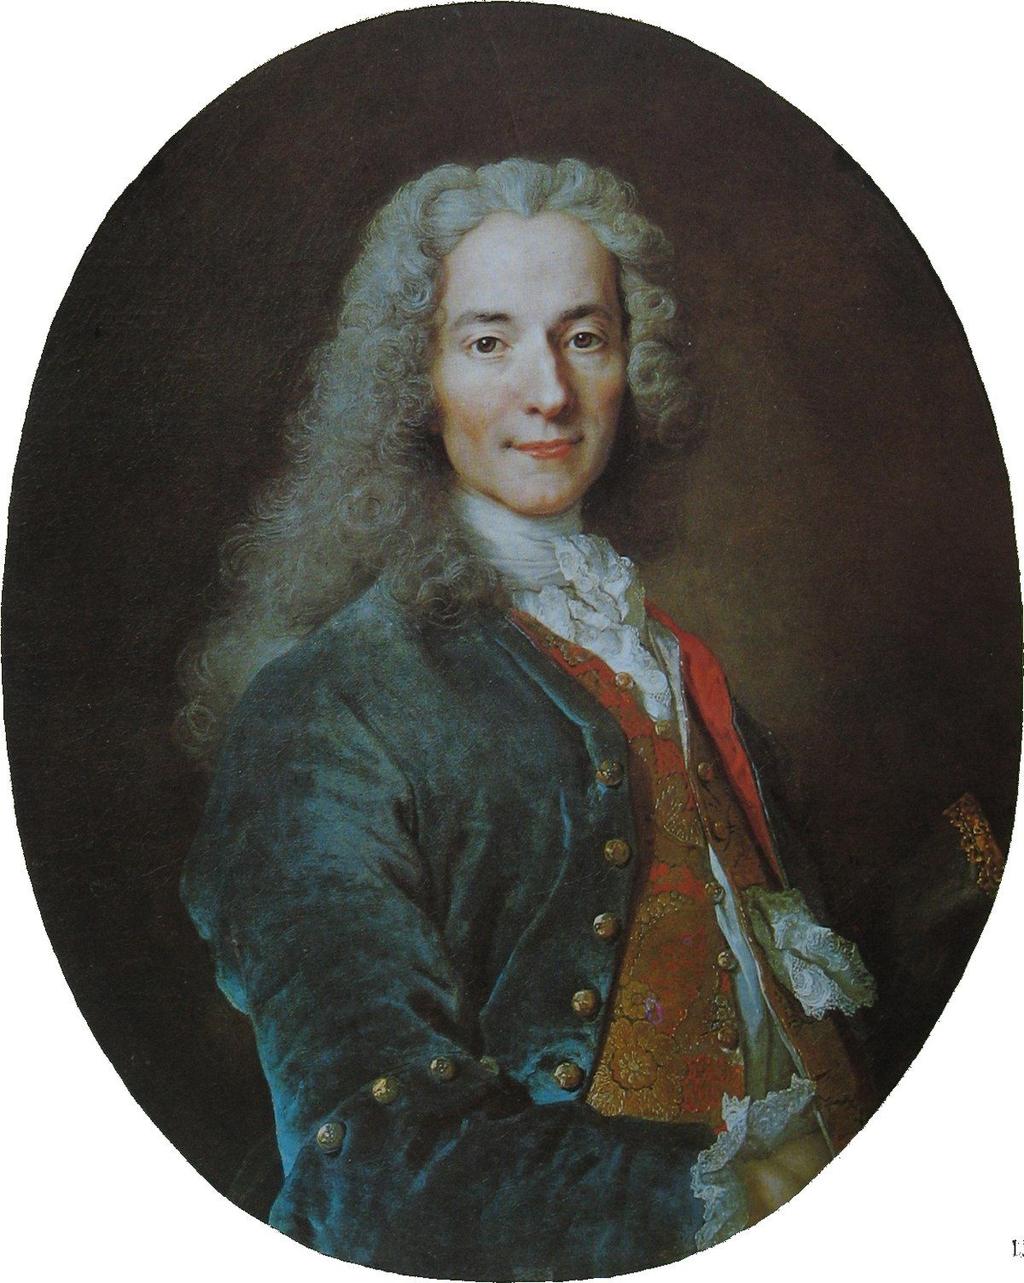 Wrote The Spirit of Laws : studied republics, monarchs, despotism Stressed: Separation of powers Balance of power Who is Voltaire? Also known as François Marie Arouet. What did he do?